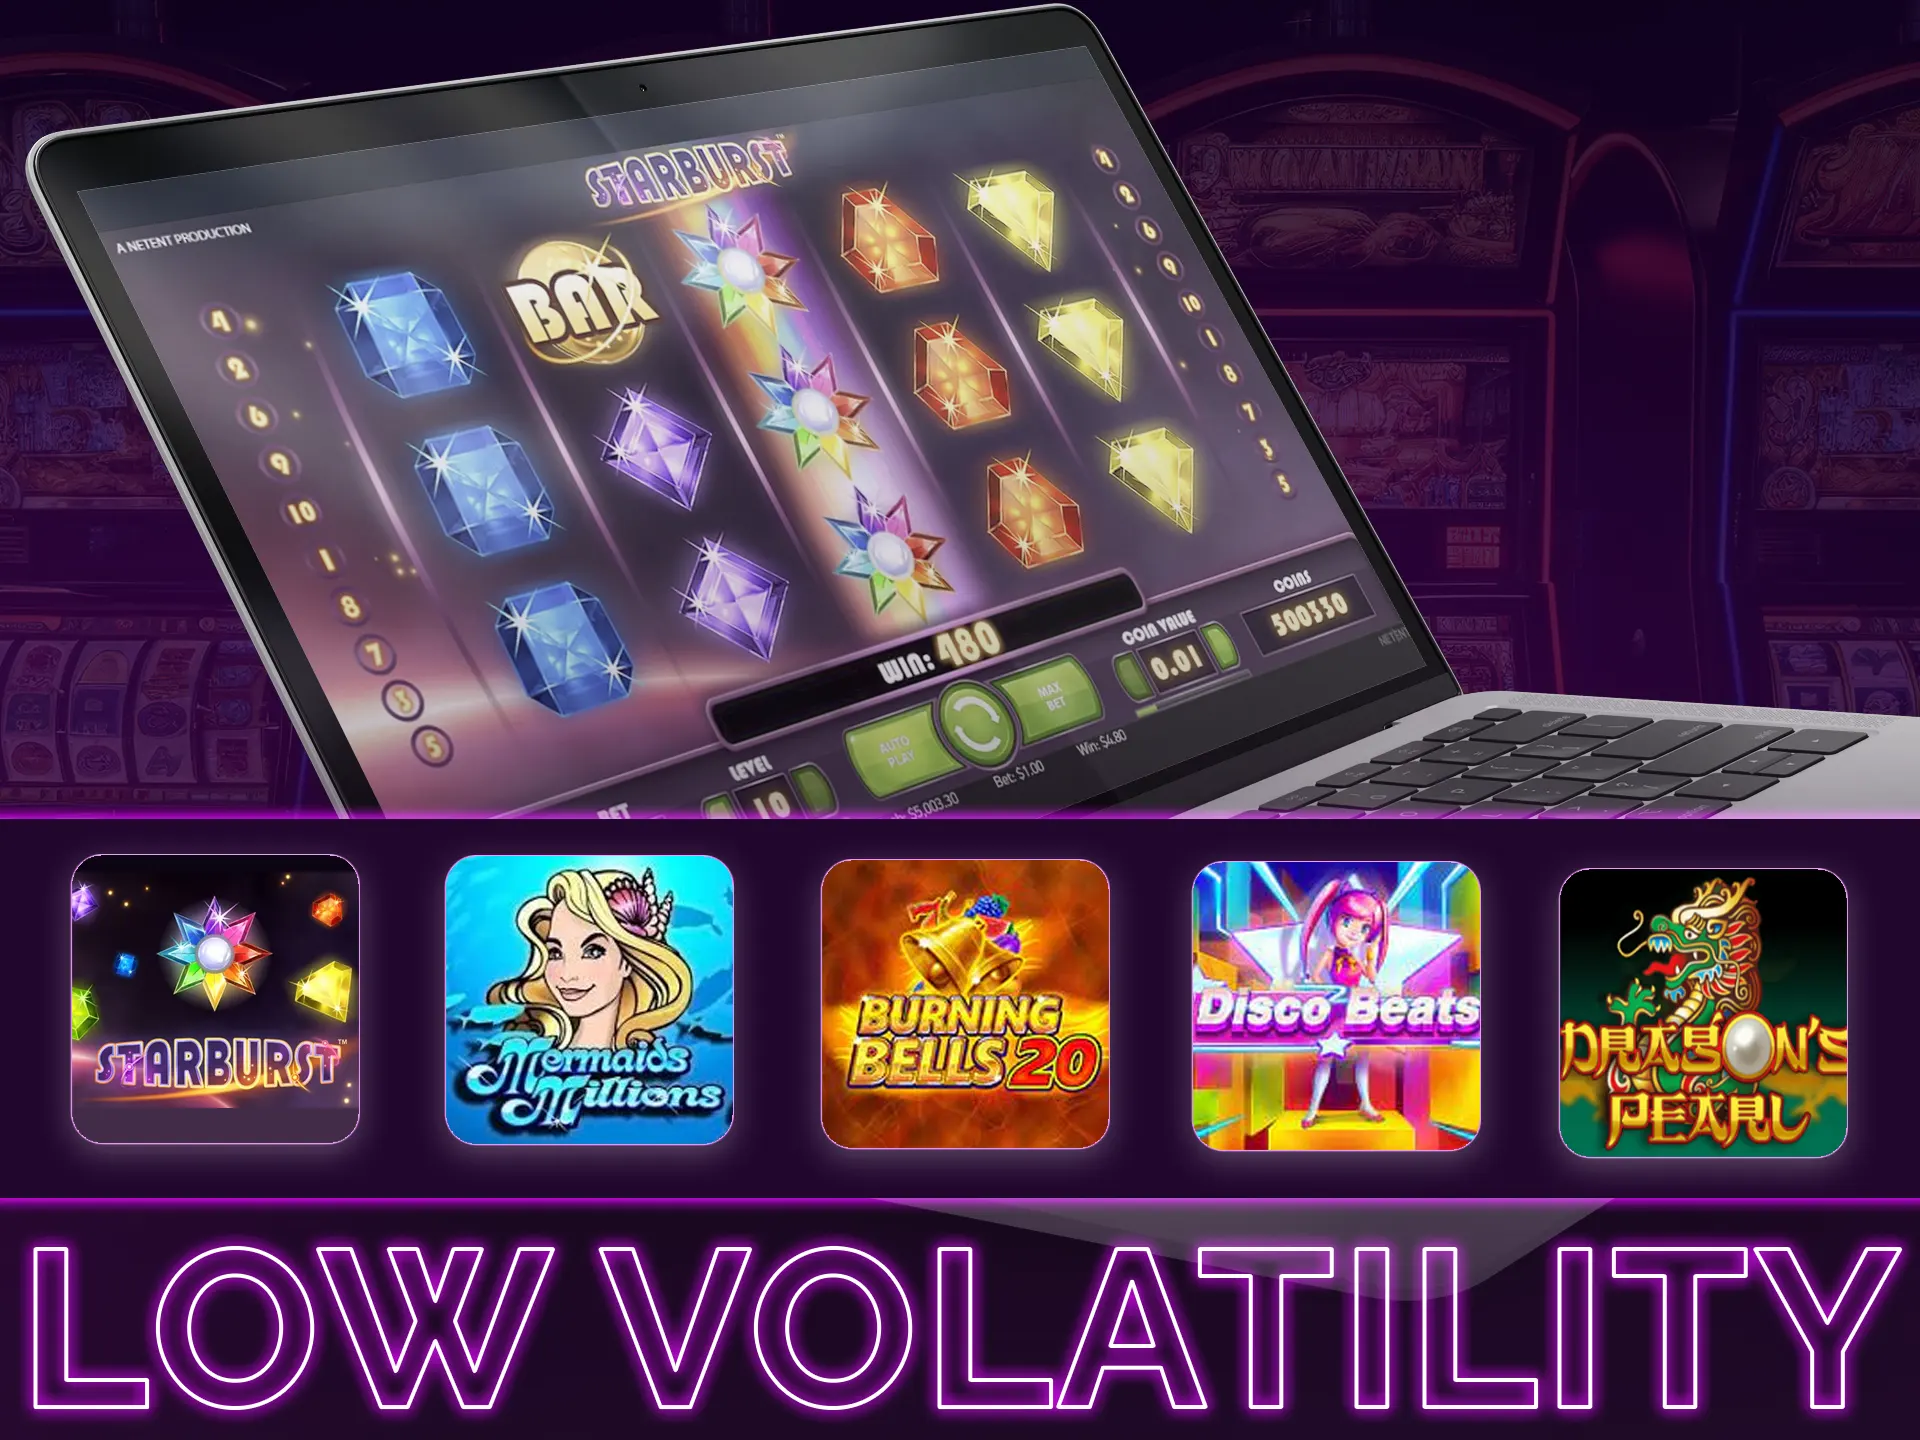 Low volatility slots giving frequent wins, small payouts, suitable for cautious players and limited budgets.